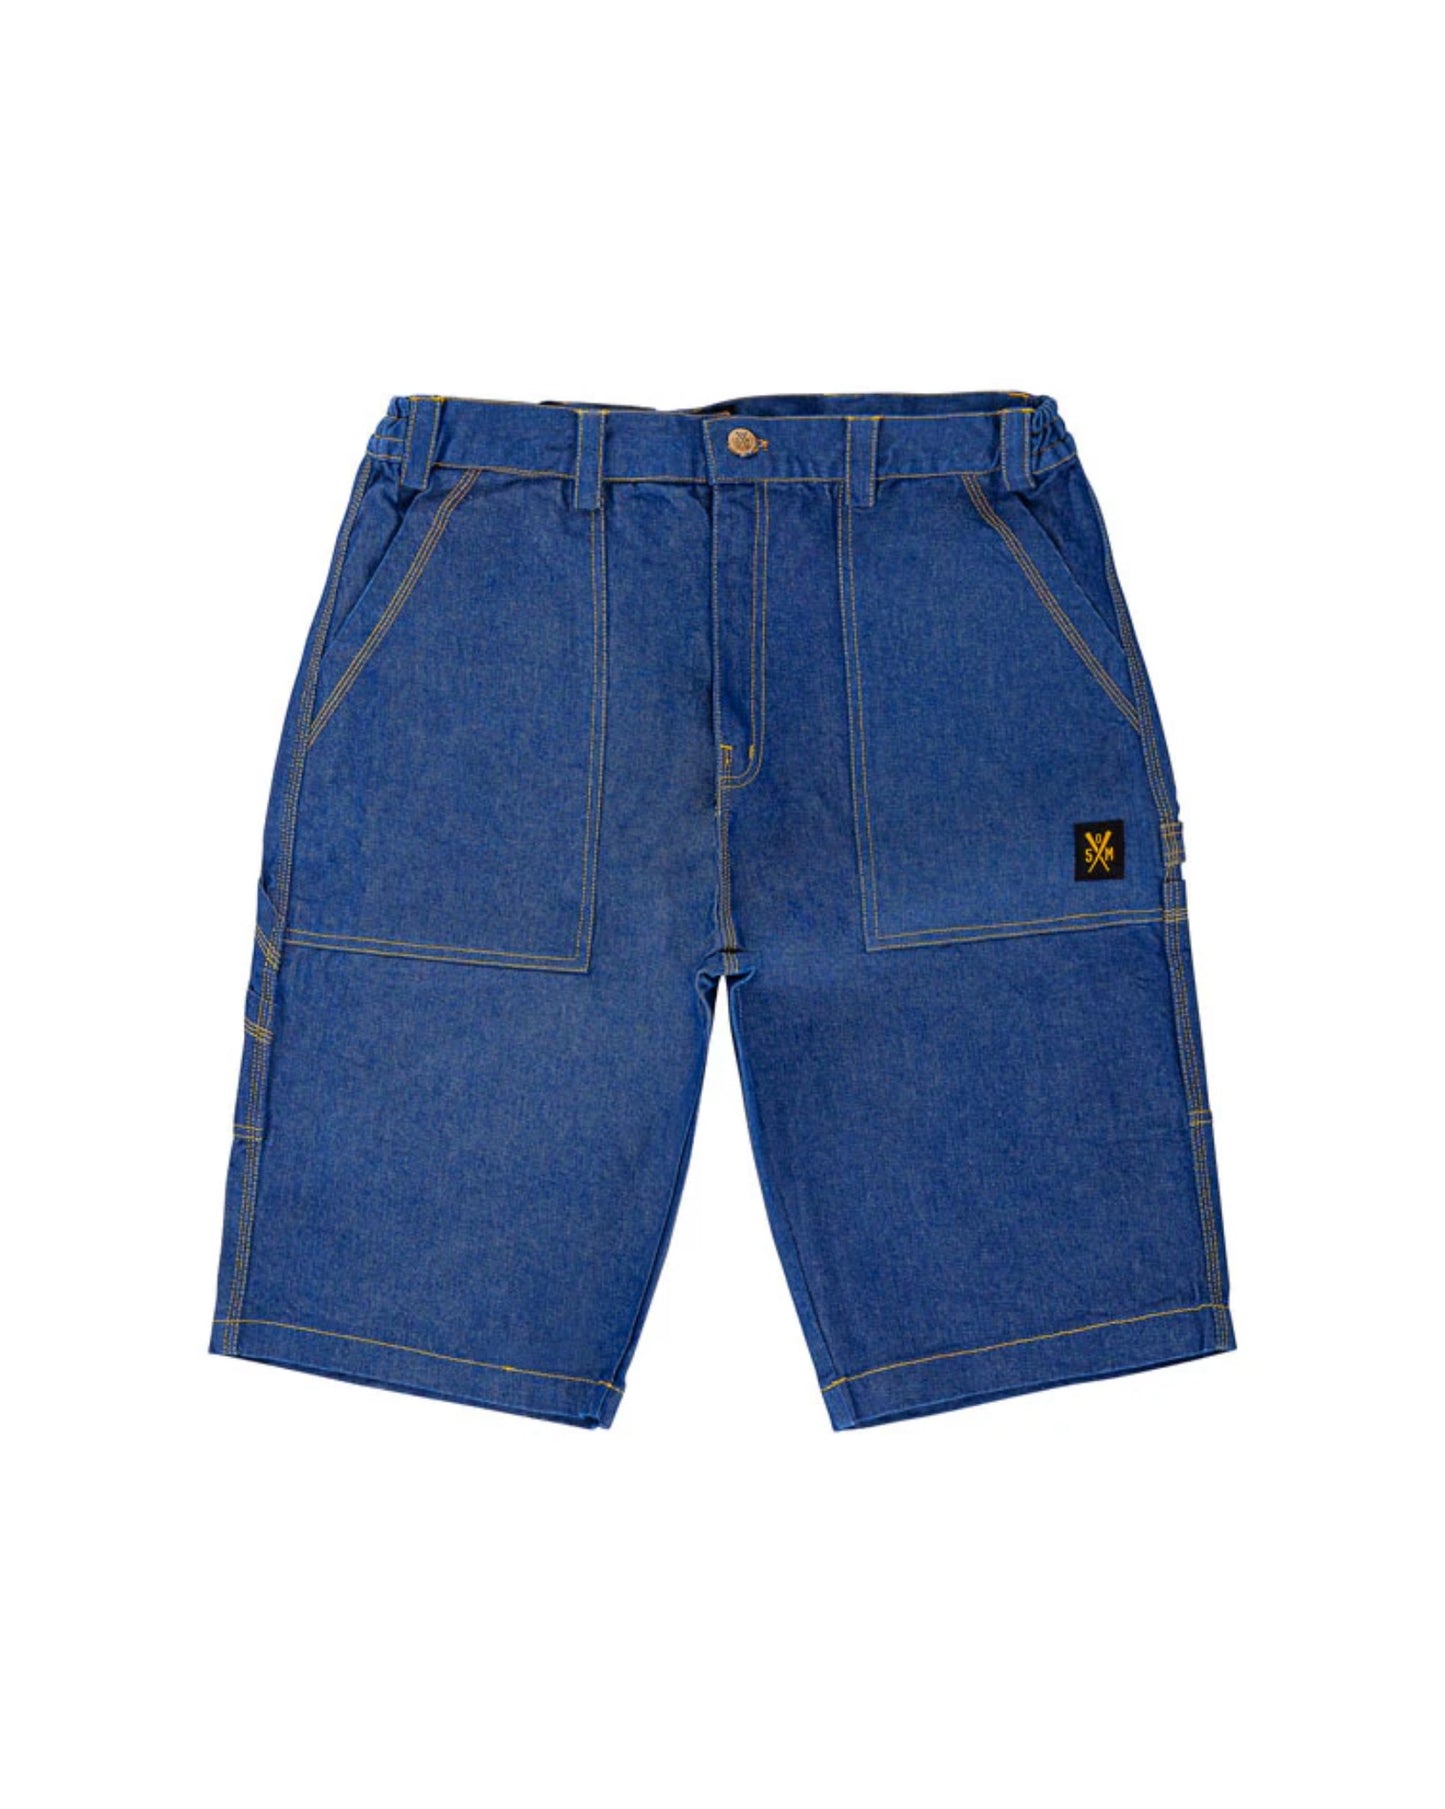 Worker shorts